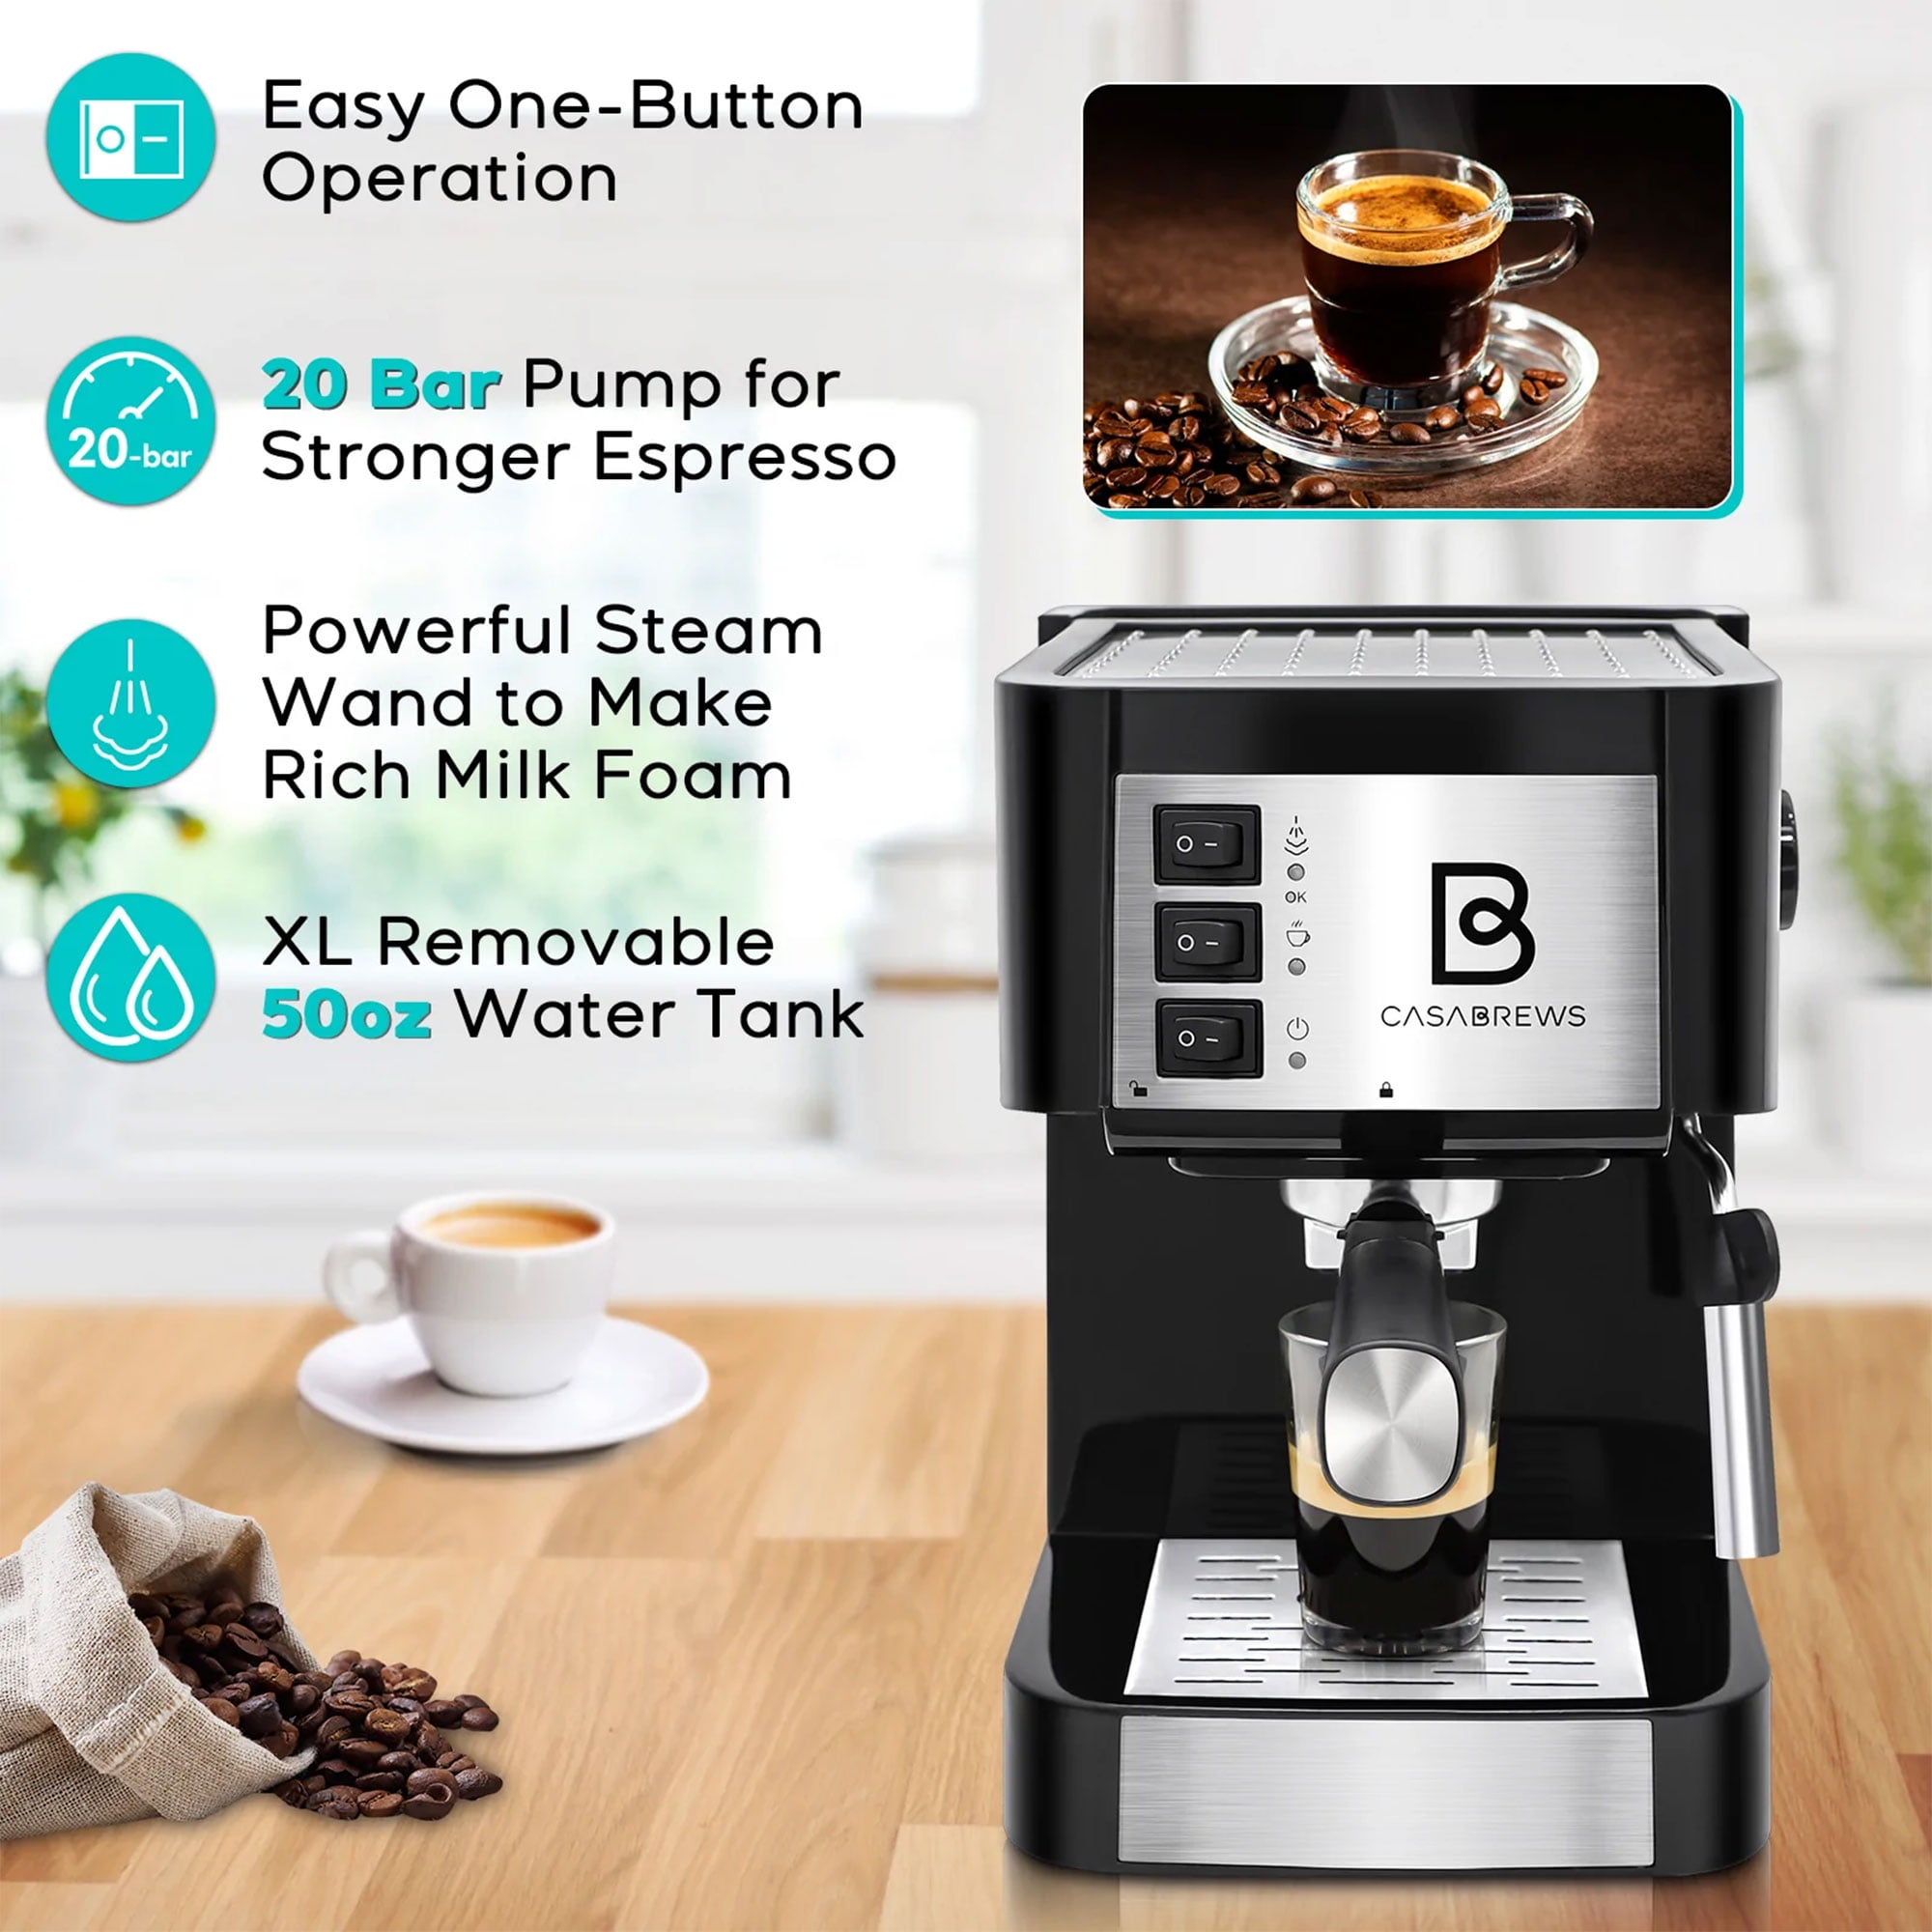  CASABREWS Espresso Machine with Grinder, Barista Espresso Maker  with Milk Frother Steam Wand, Professional Cappuccino Latte Machine with  LCD Display, Gifts for Dad, Mom, Coffee Lover or Housewarming: Home &  Kitchen